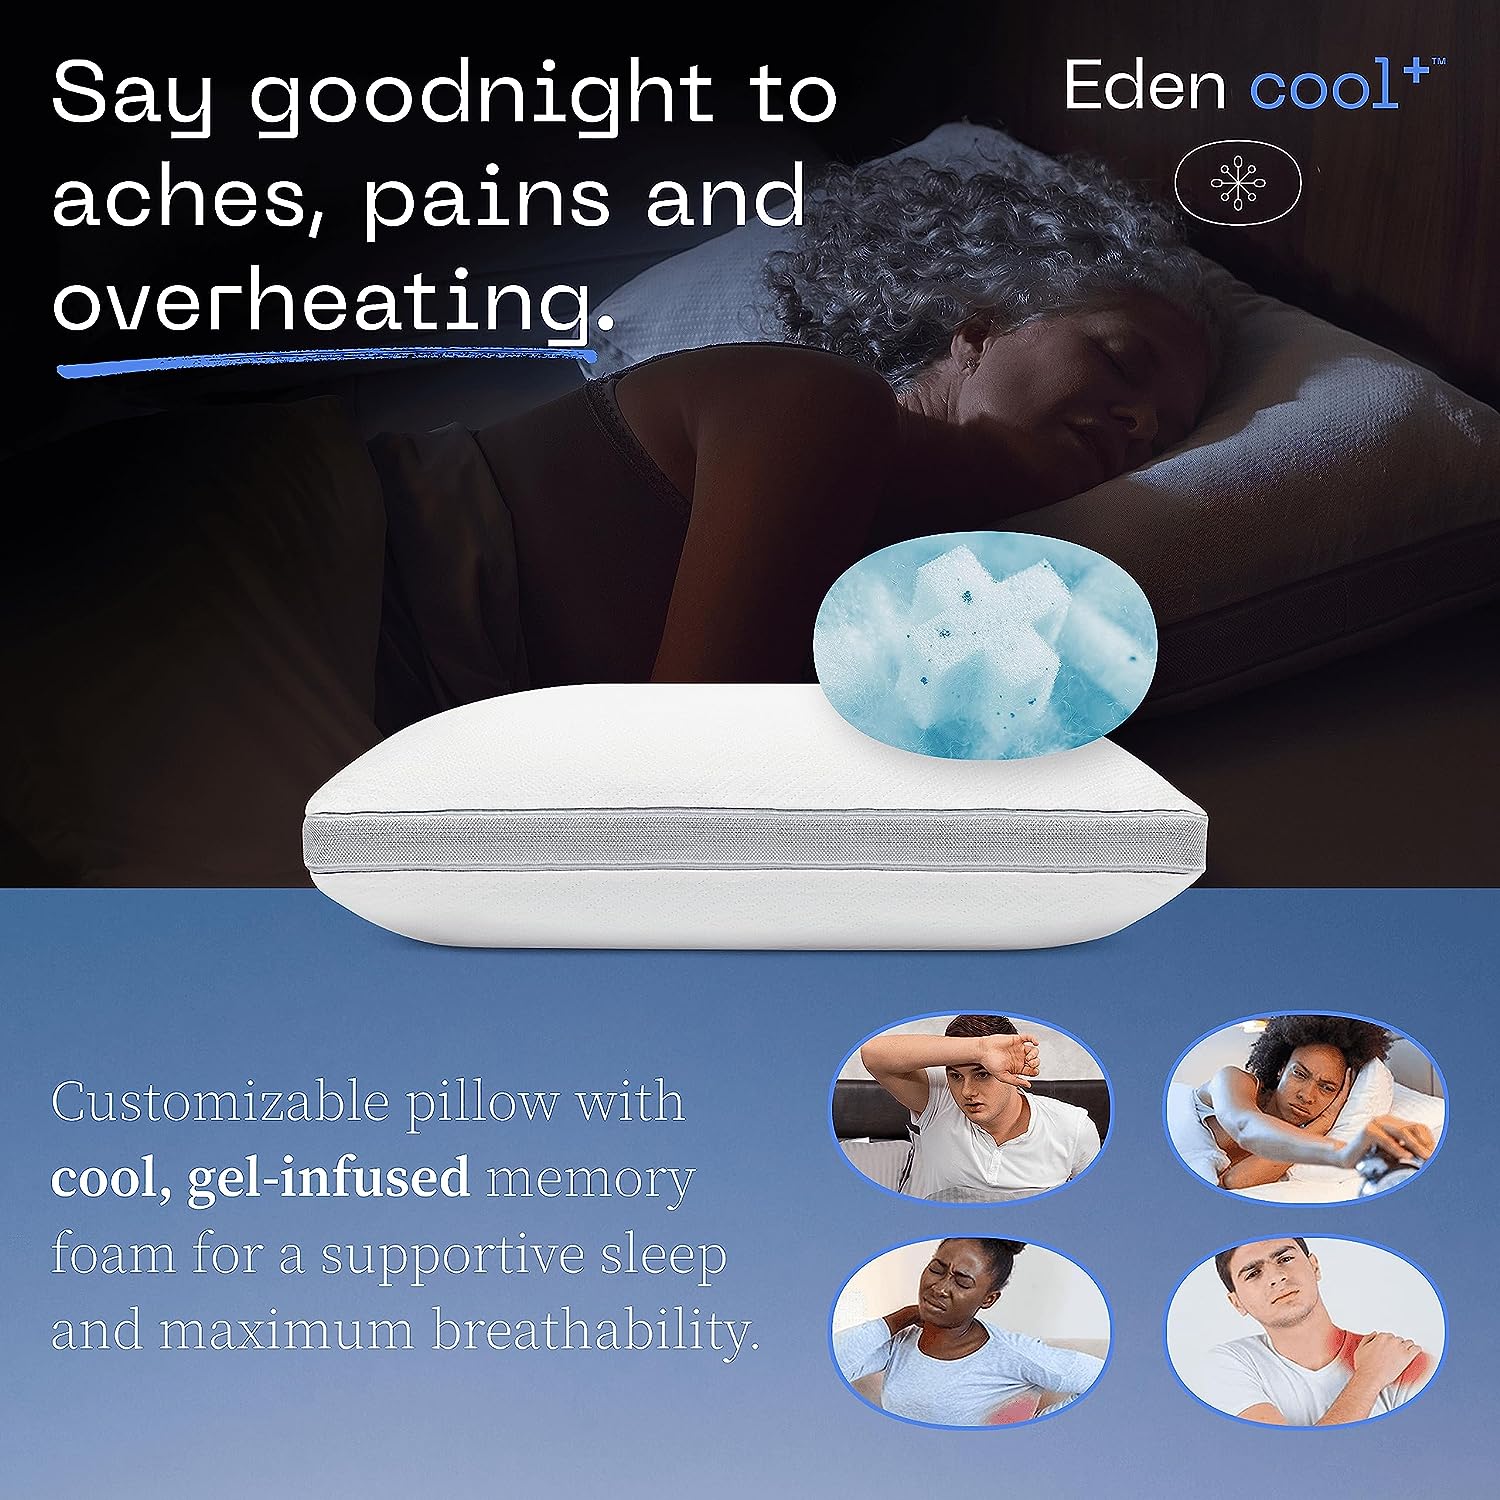 https://bigbigmart.com/wp-content/uploads/2023/08/Coop-Home-Goods-Eden-Cool-Pillow-Queen-Size-Plus-Shaped-Memory-Foam-Pillows-with-Cooling-Gel-Back-Stomach-or-Side-Sleeper-Pillow-Adjustable-Neck-Support-for-Sleeping-CertiPUR-US-GREENGUARD-Gold2.jpg